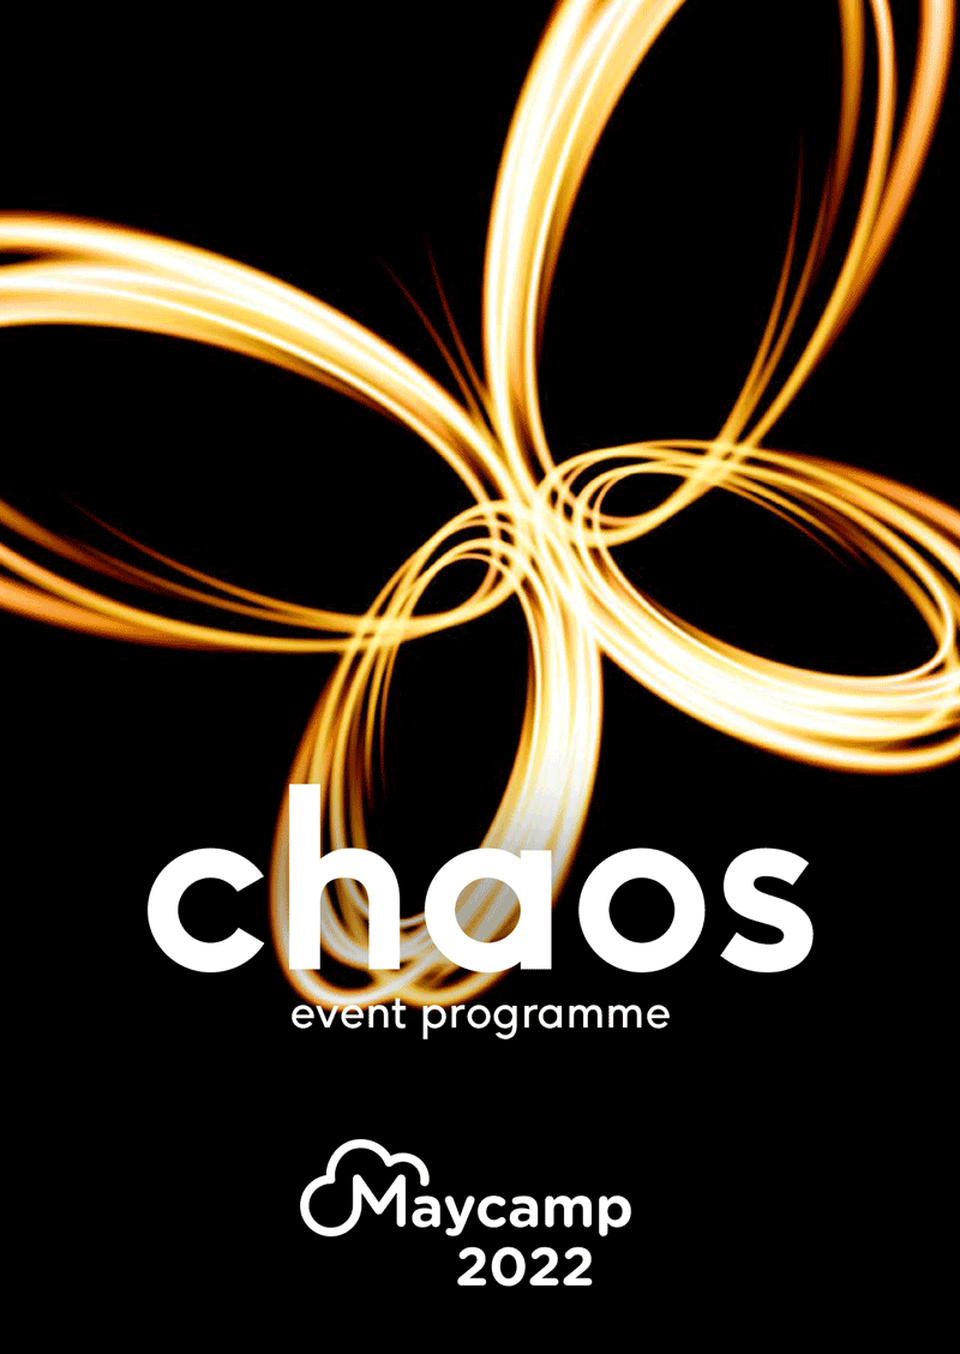 Maycamp 2022 Programme cover. Butterfly shape logo with the word chaos written across it.